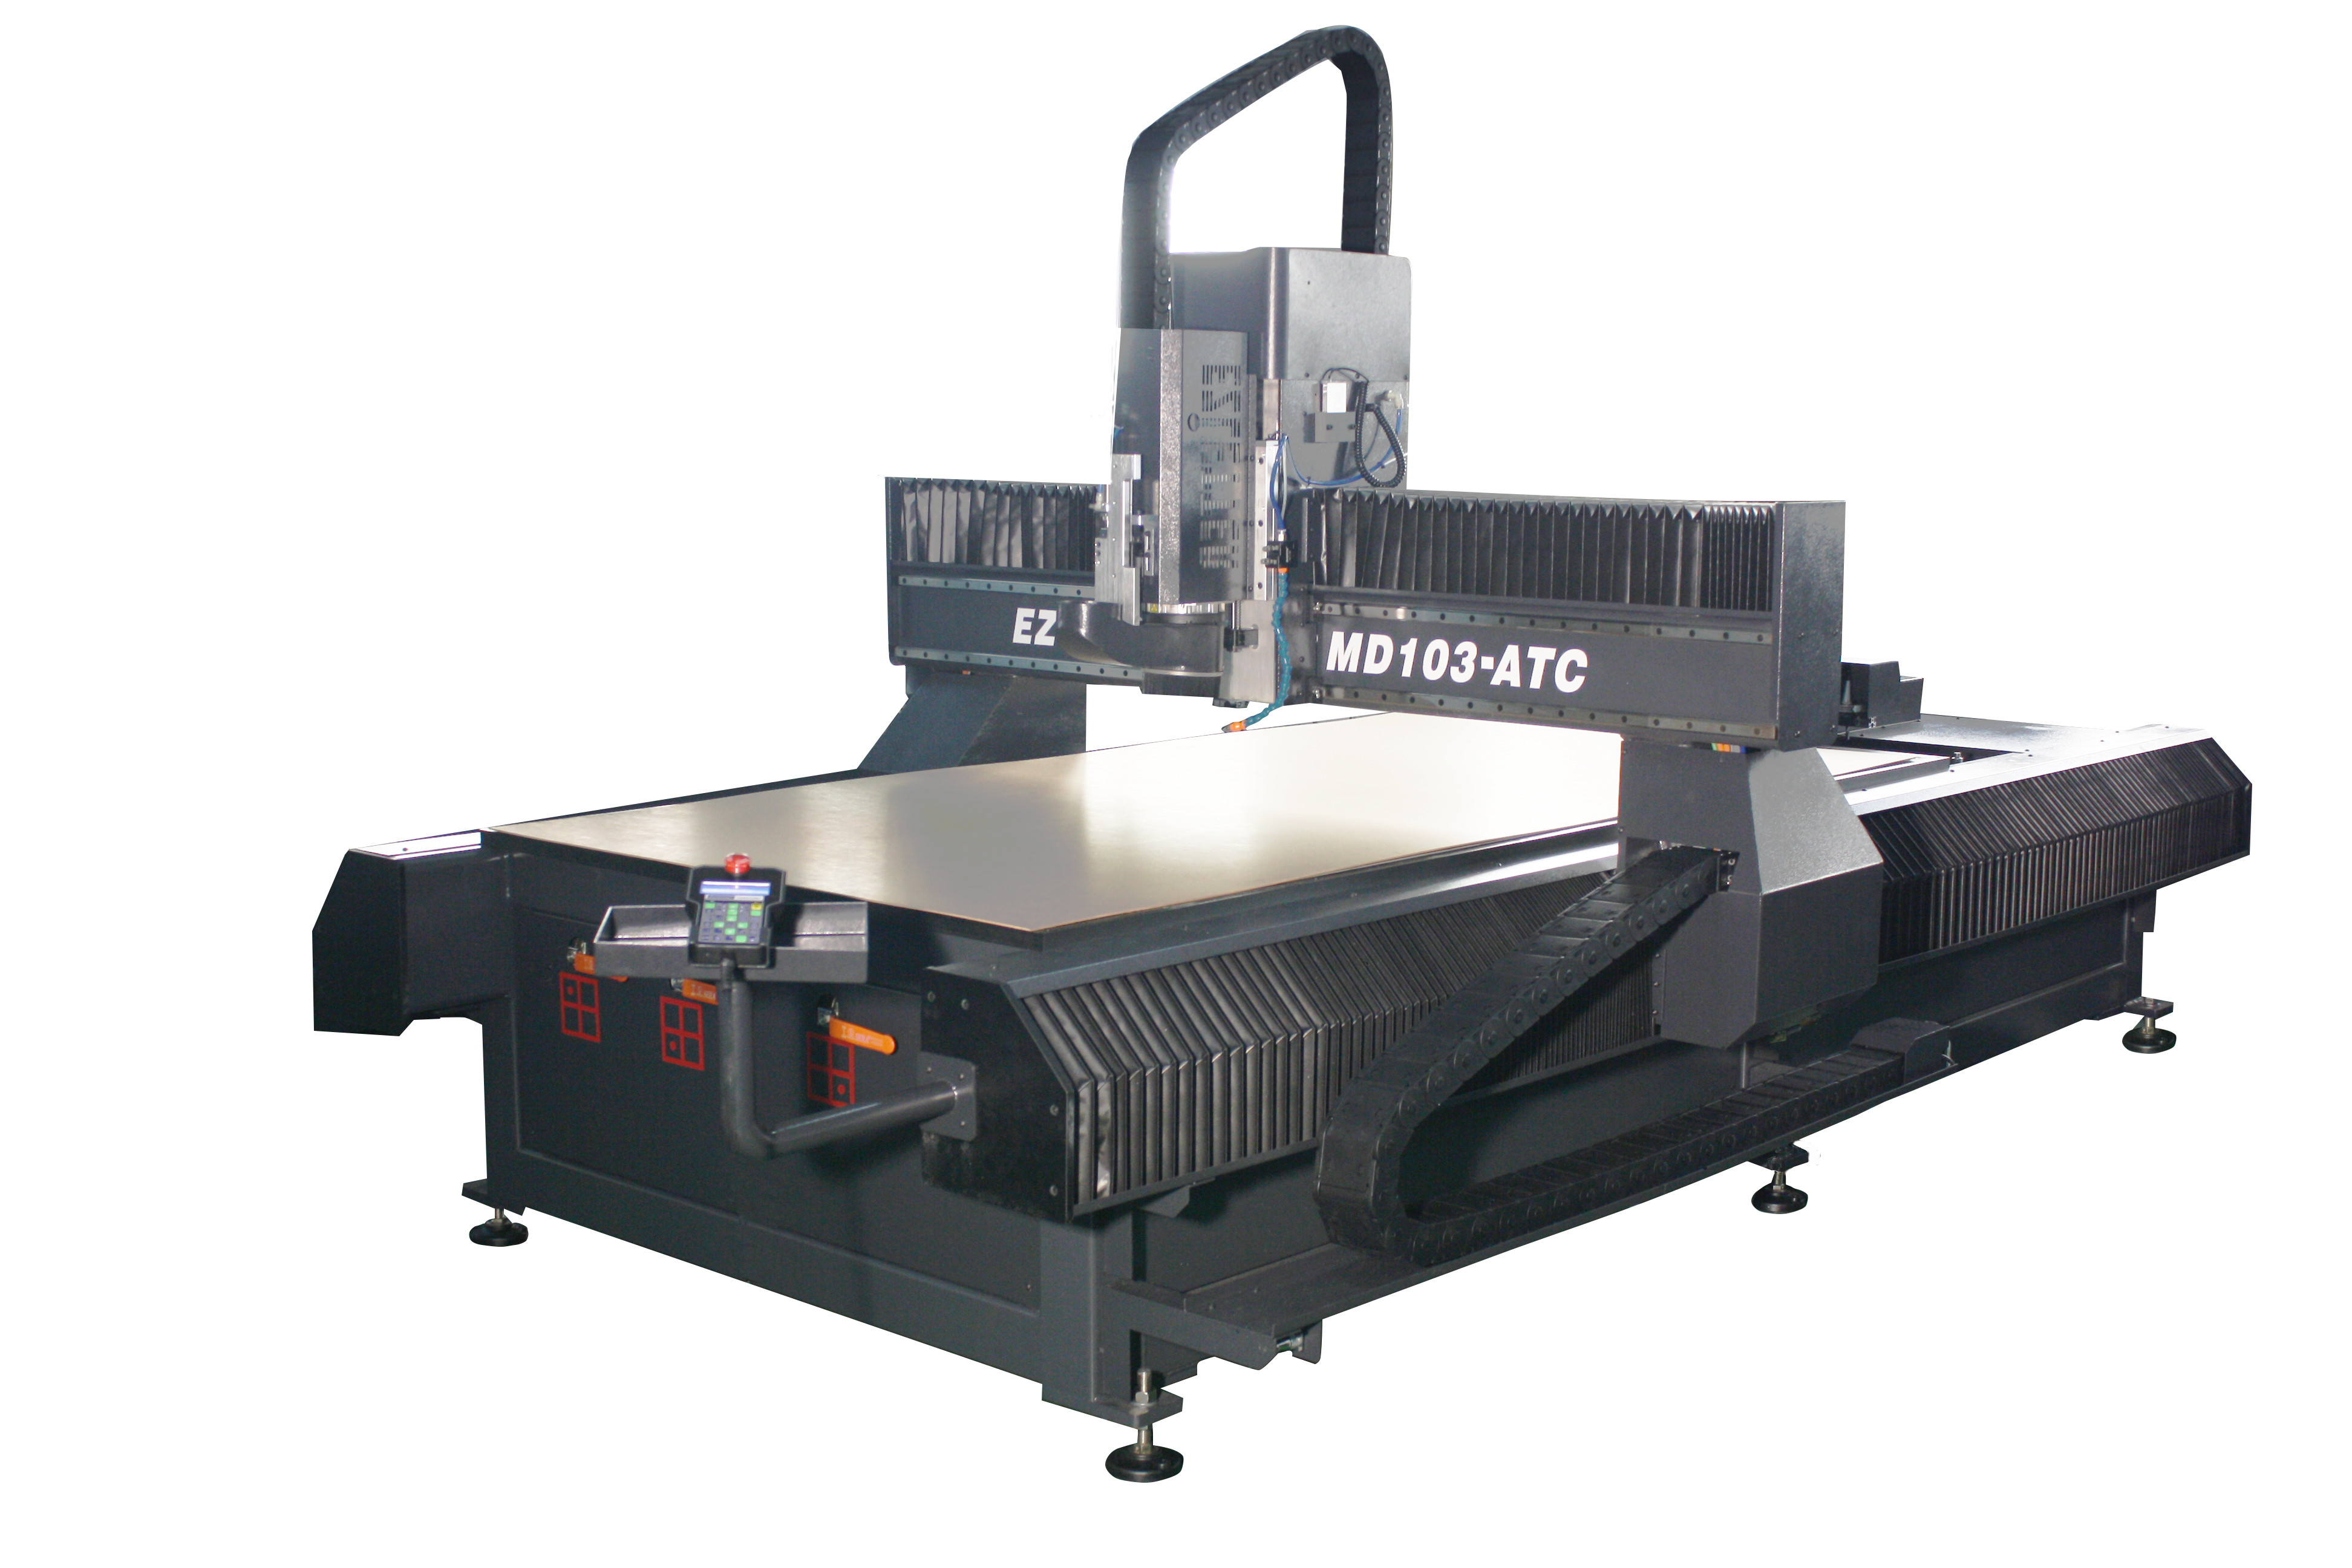  EZCNC Routers-MD 1325/Wood, Acrylic, Alu. 3D Surface; SolidSurface cutting, engraving and marking system Manufactures